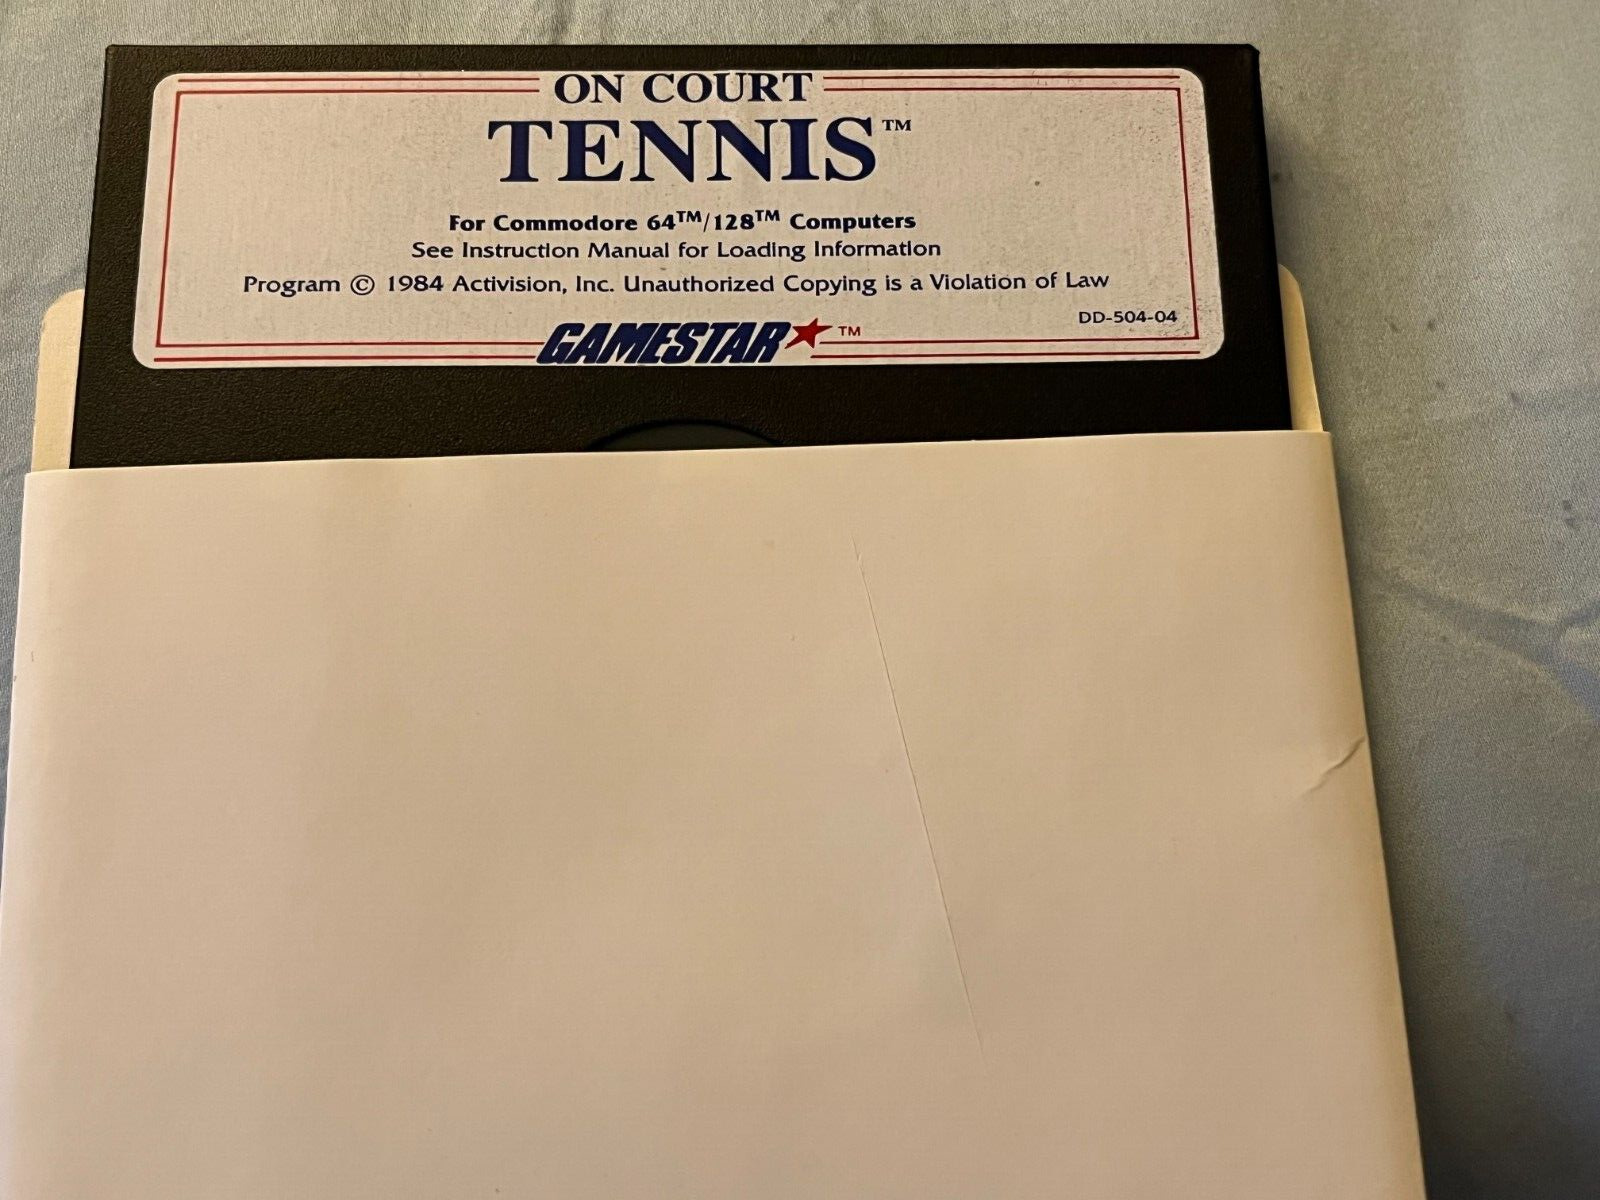 Commodore 64/128: On Court Tennis 1984 Activision